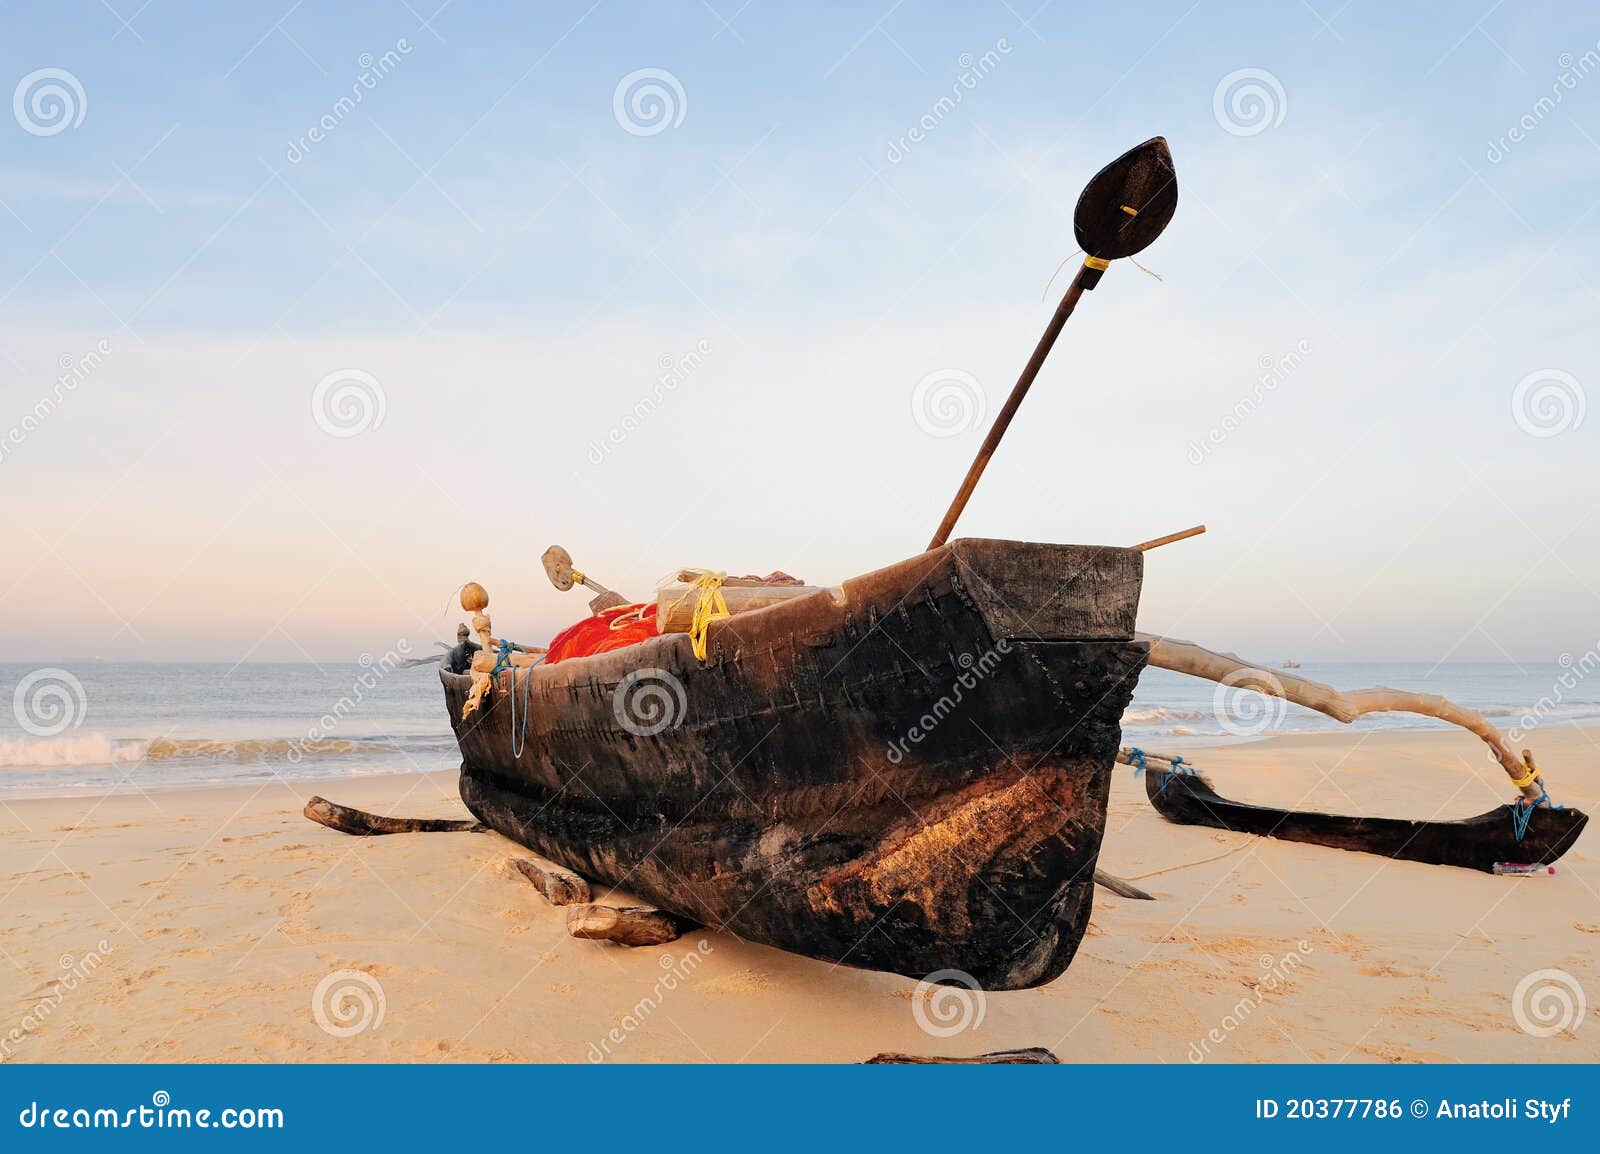 Wooden Boat Royalty Free Stock Image - Image: 20377786